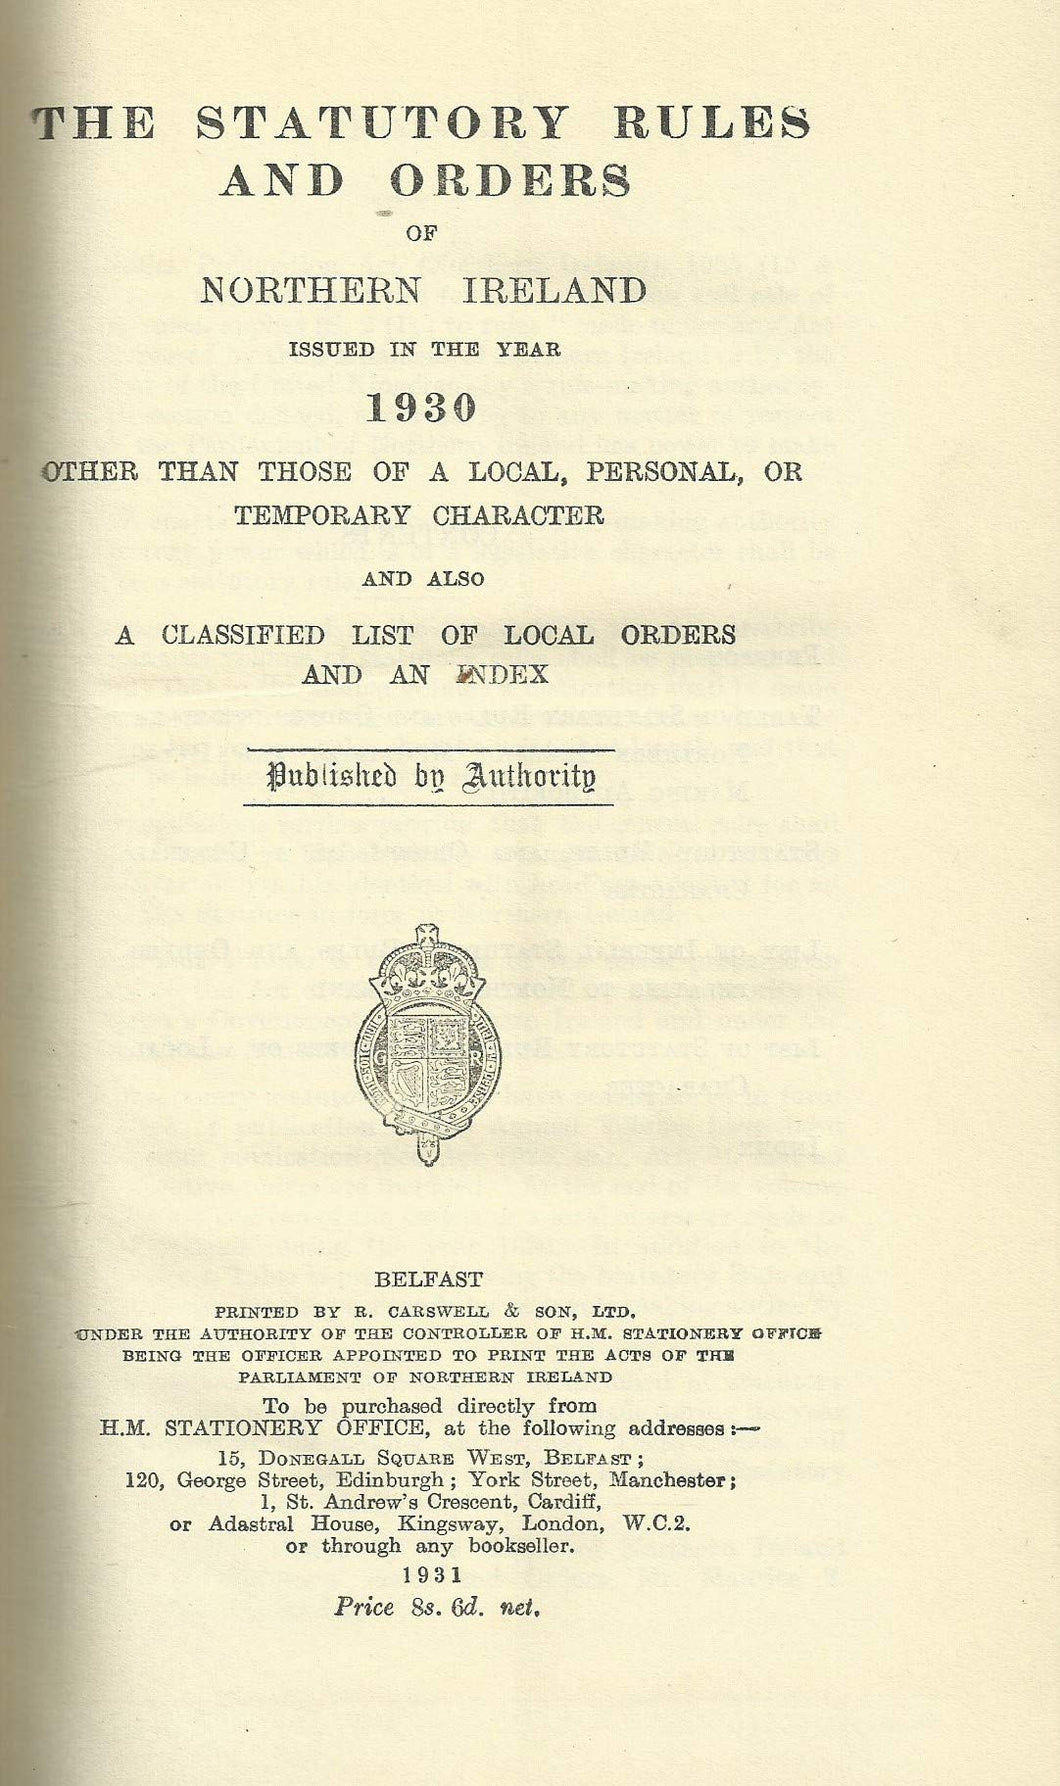 Northern Ireland Statutory Rules and Orders, 1930 - The Statutory Rules and Orders of Northern Ireland